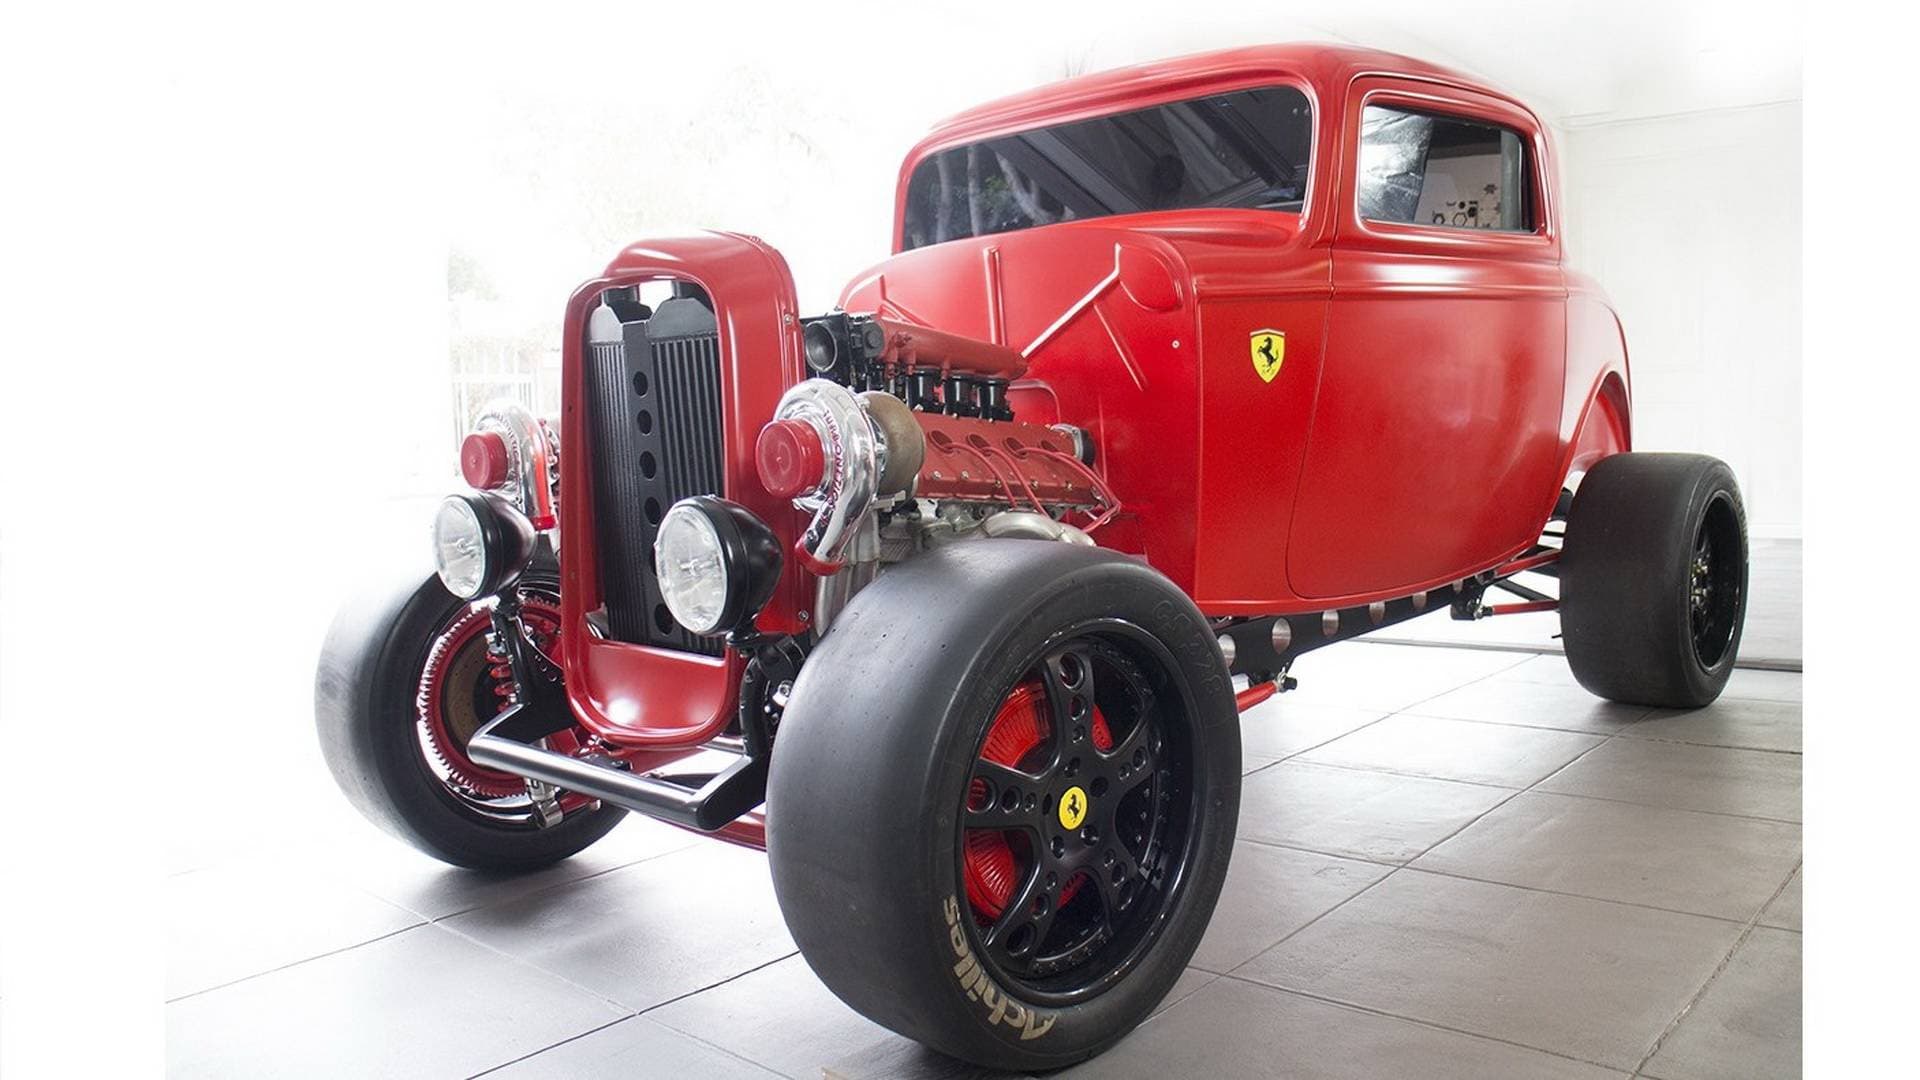 This 1932 Ford with a 950-Horsepower Ferrari Engine Is for Sale